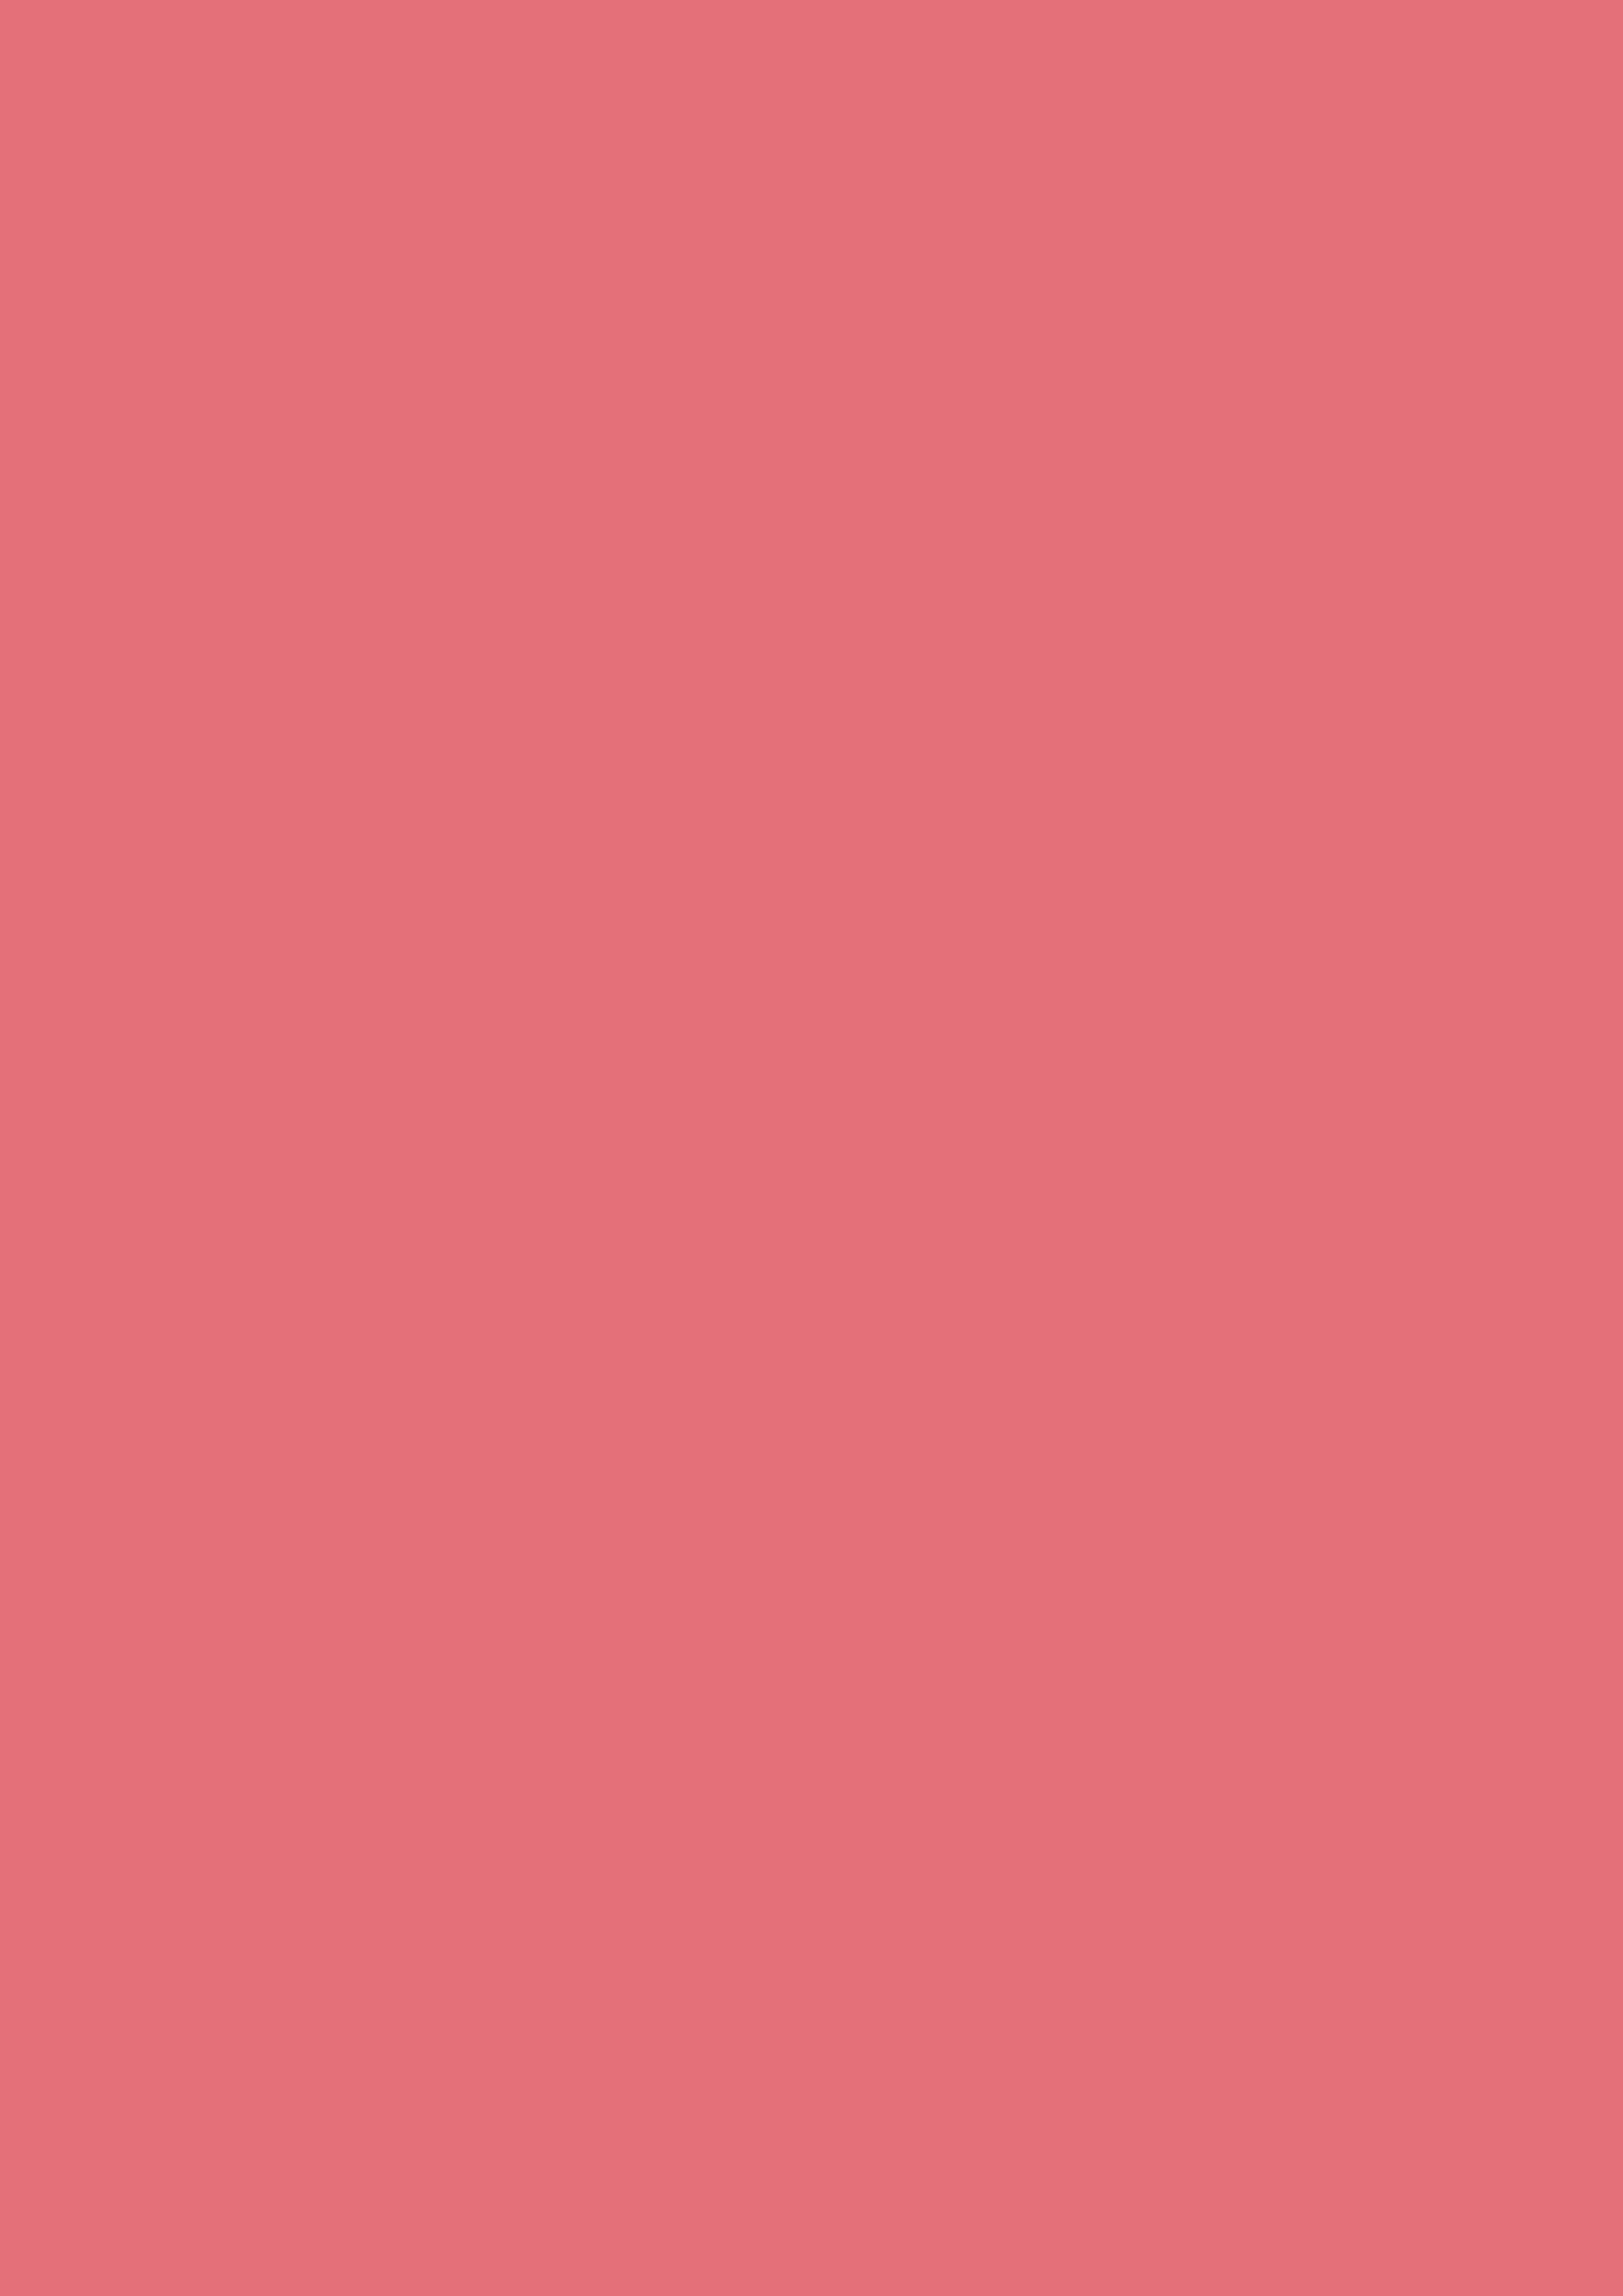 2480x3508 Candy Pink Solid Color Background